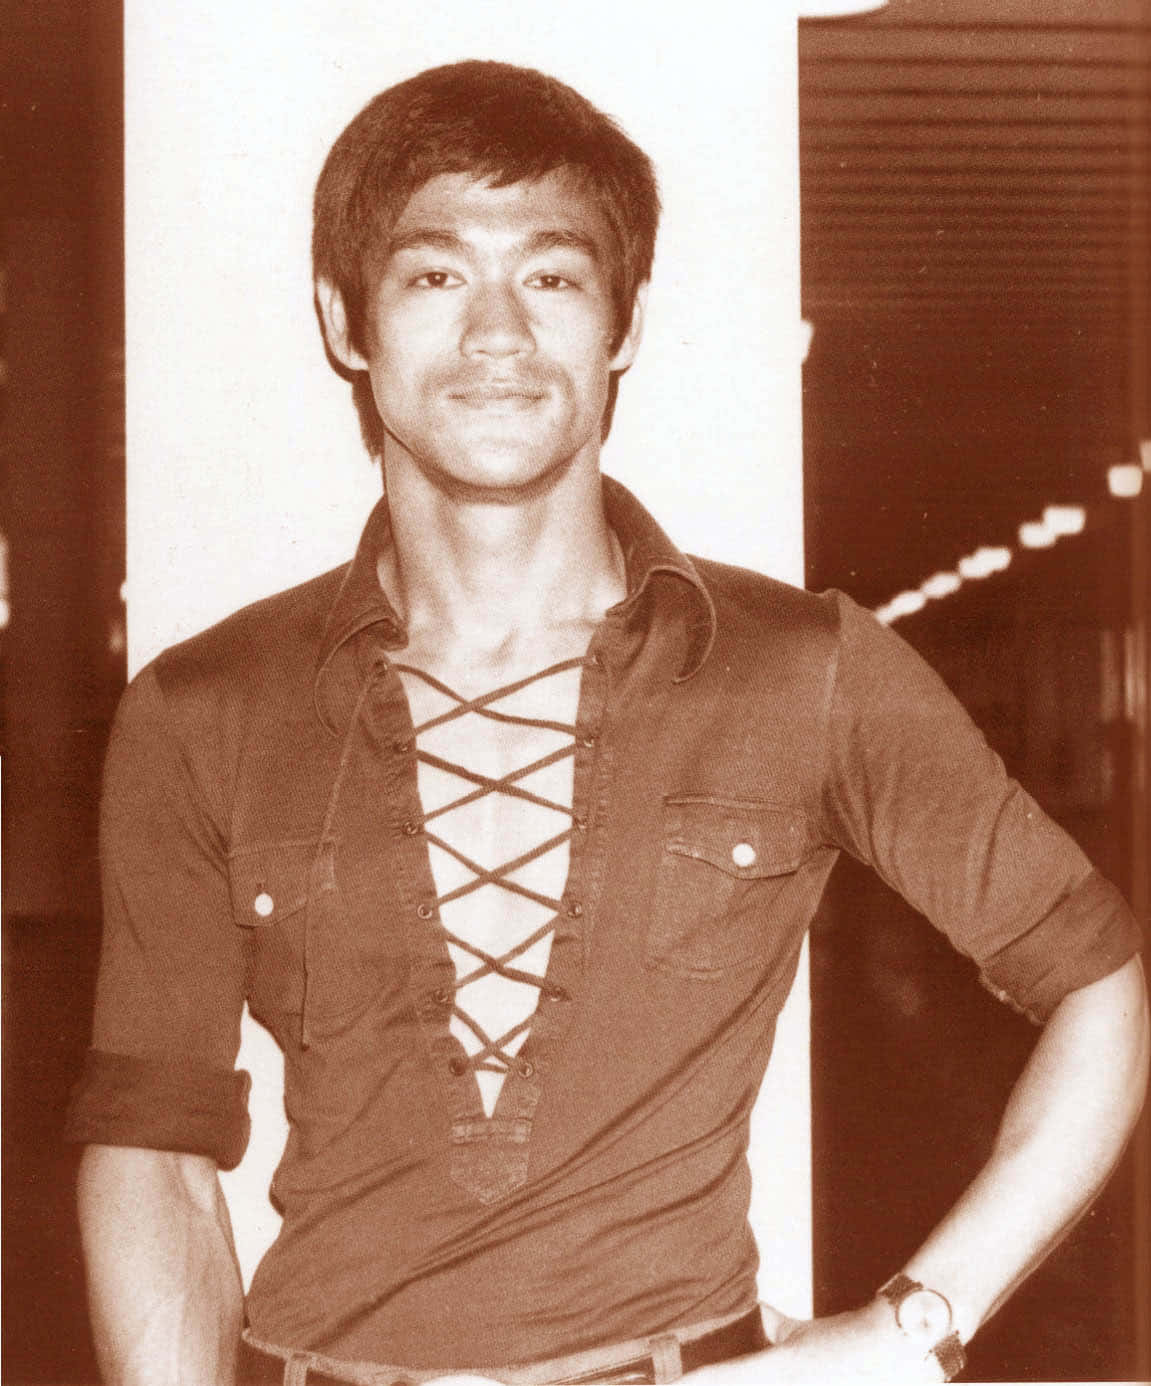 Bruce Lee - The Martial Arts Master